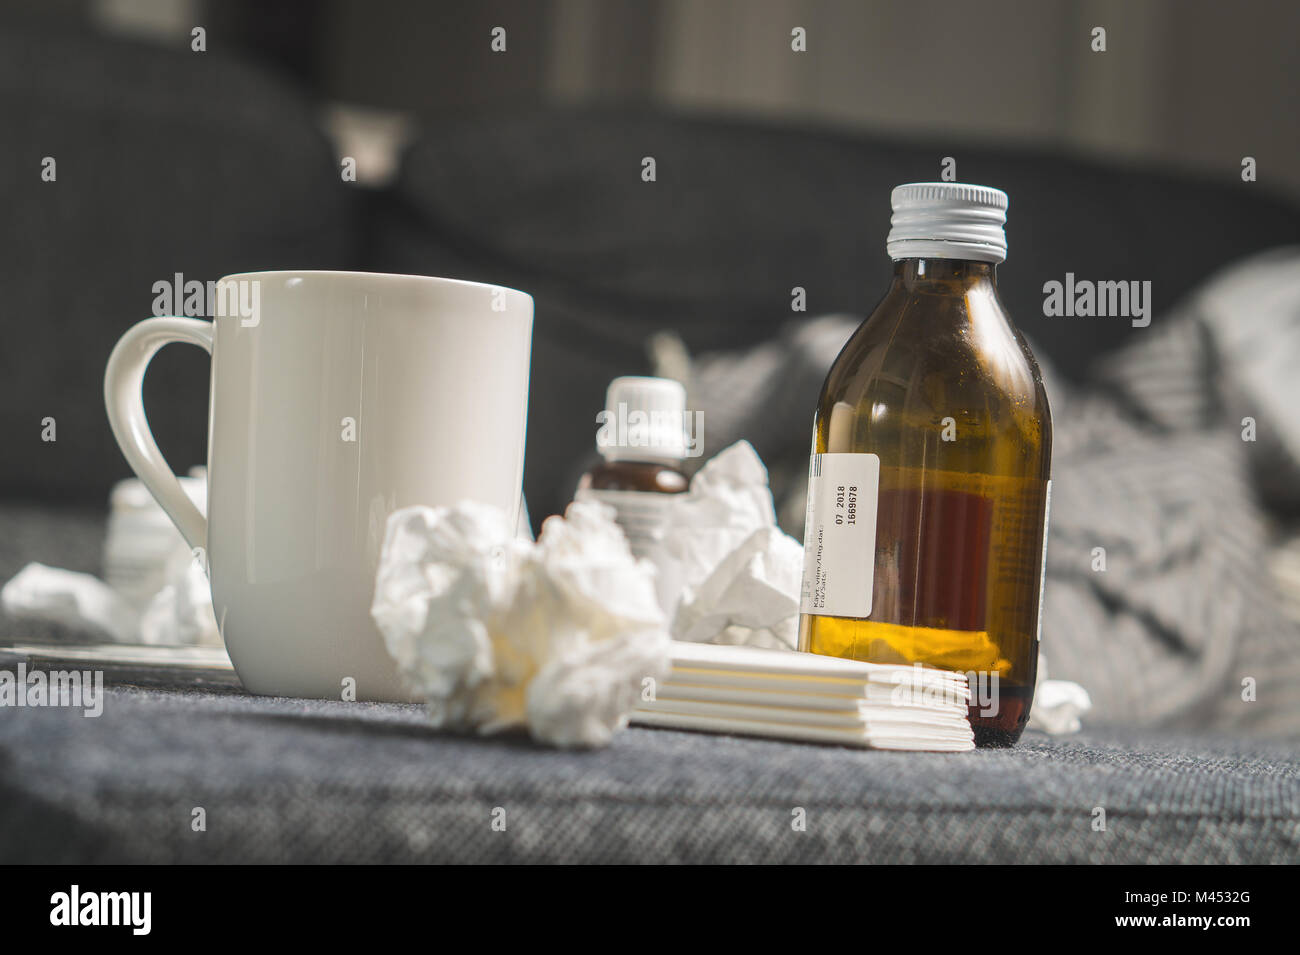 Cold medicine, cough syrup, hot beverage, paper towels and tissues to beat sickness, fever or flu. Get well kit on table or sofa couch. Being ill. Stock Photo